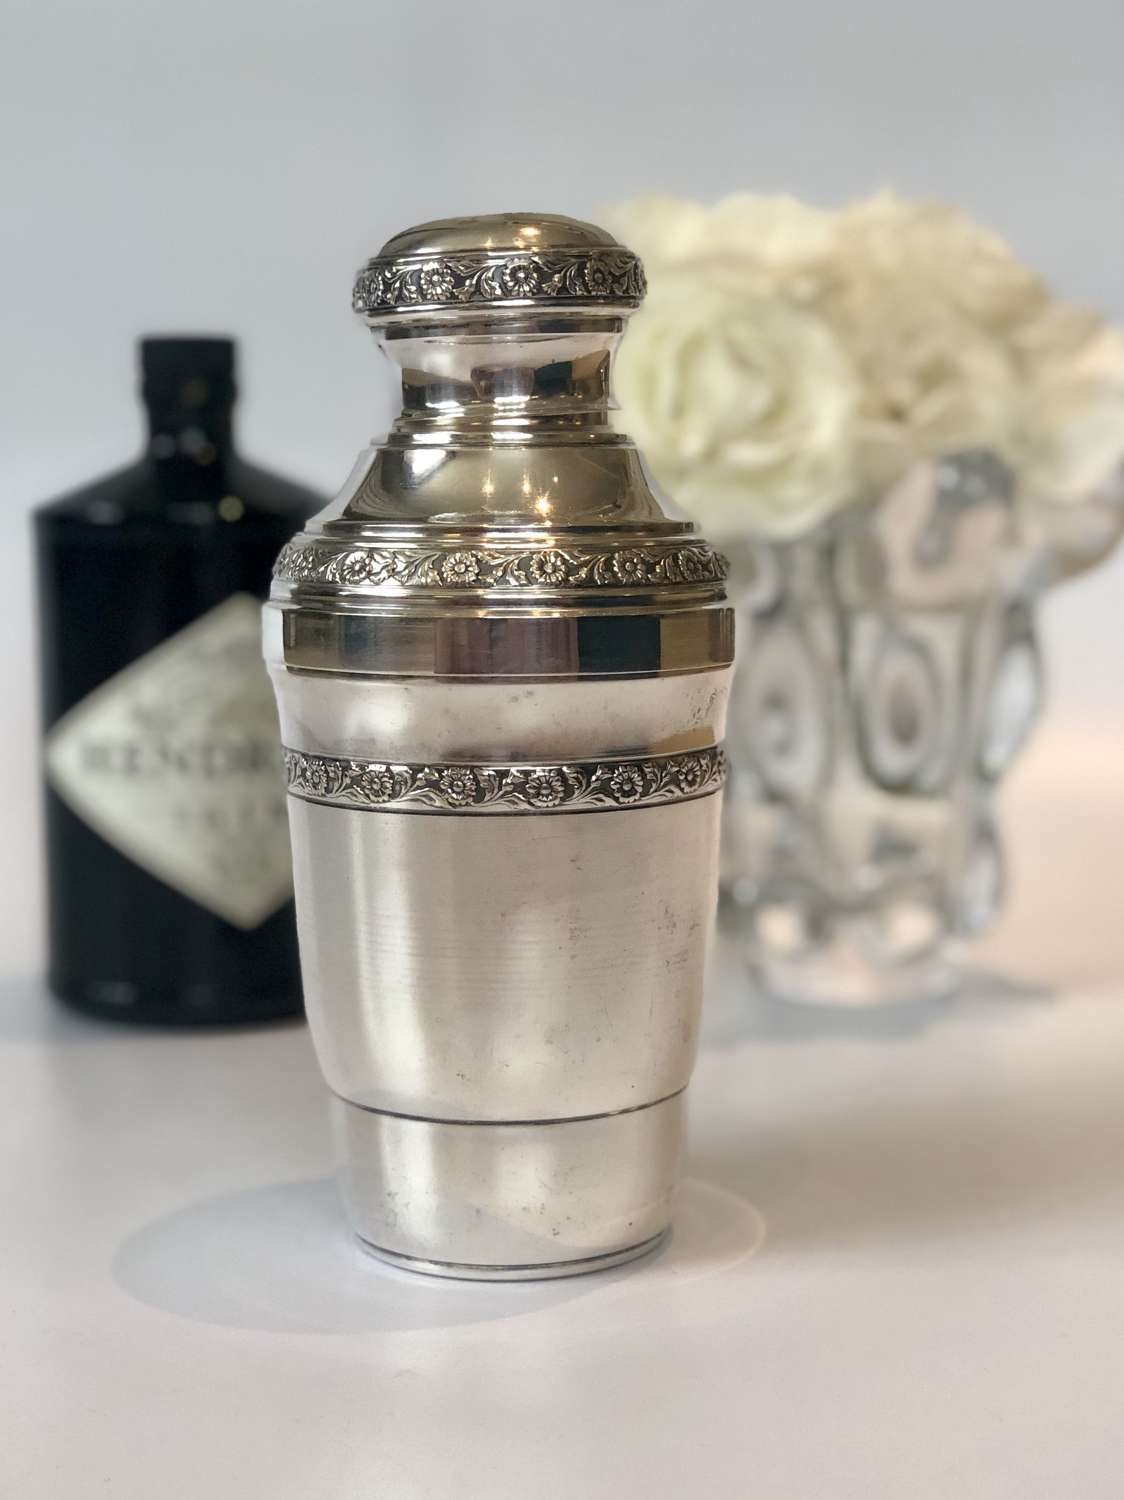 Pretty embossed flower silver plated cocktail shaker